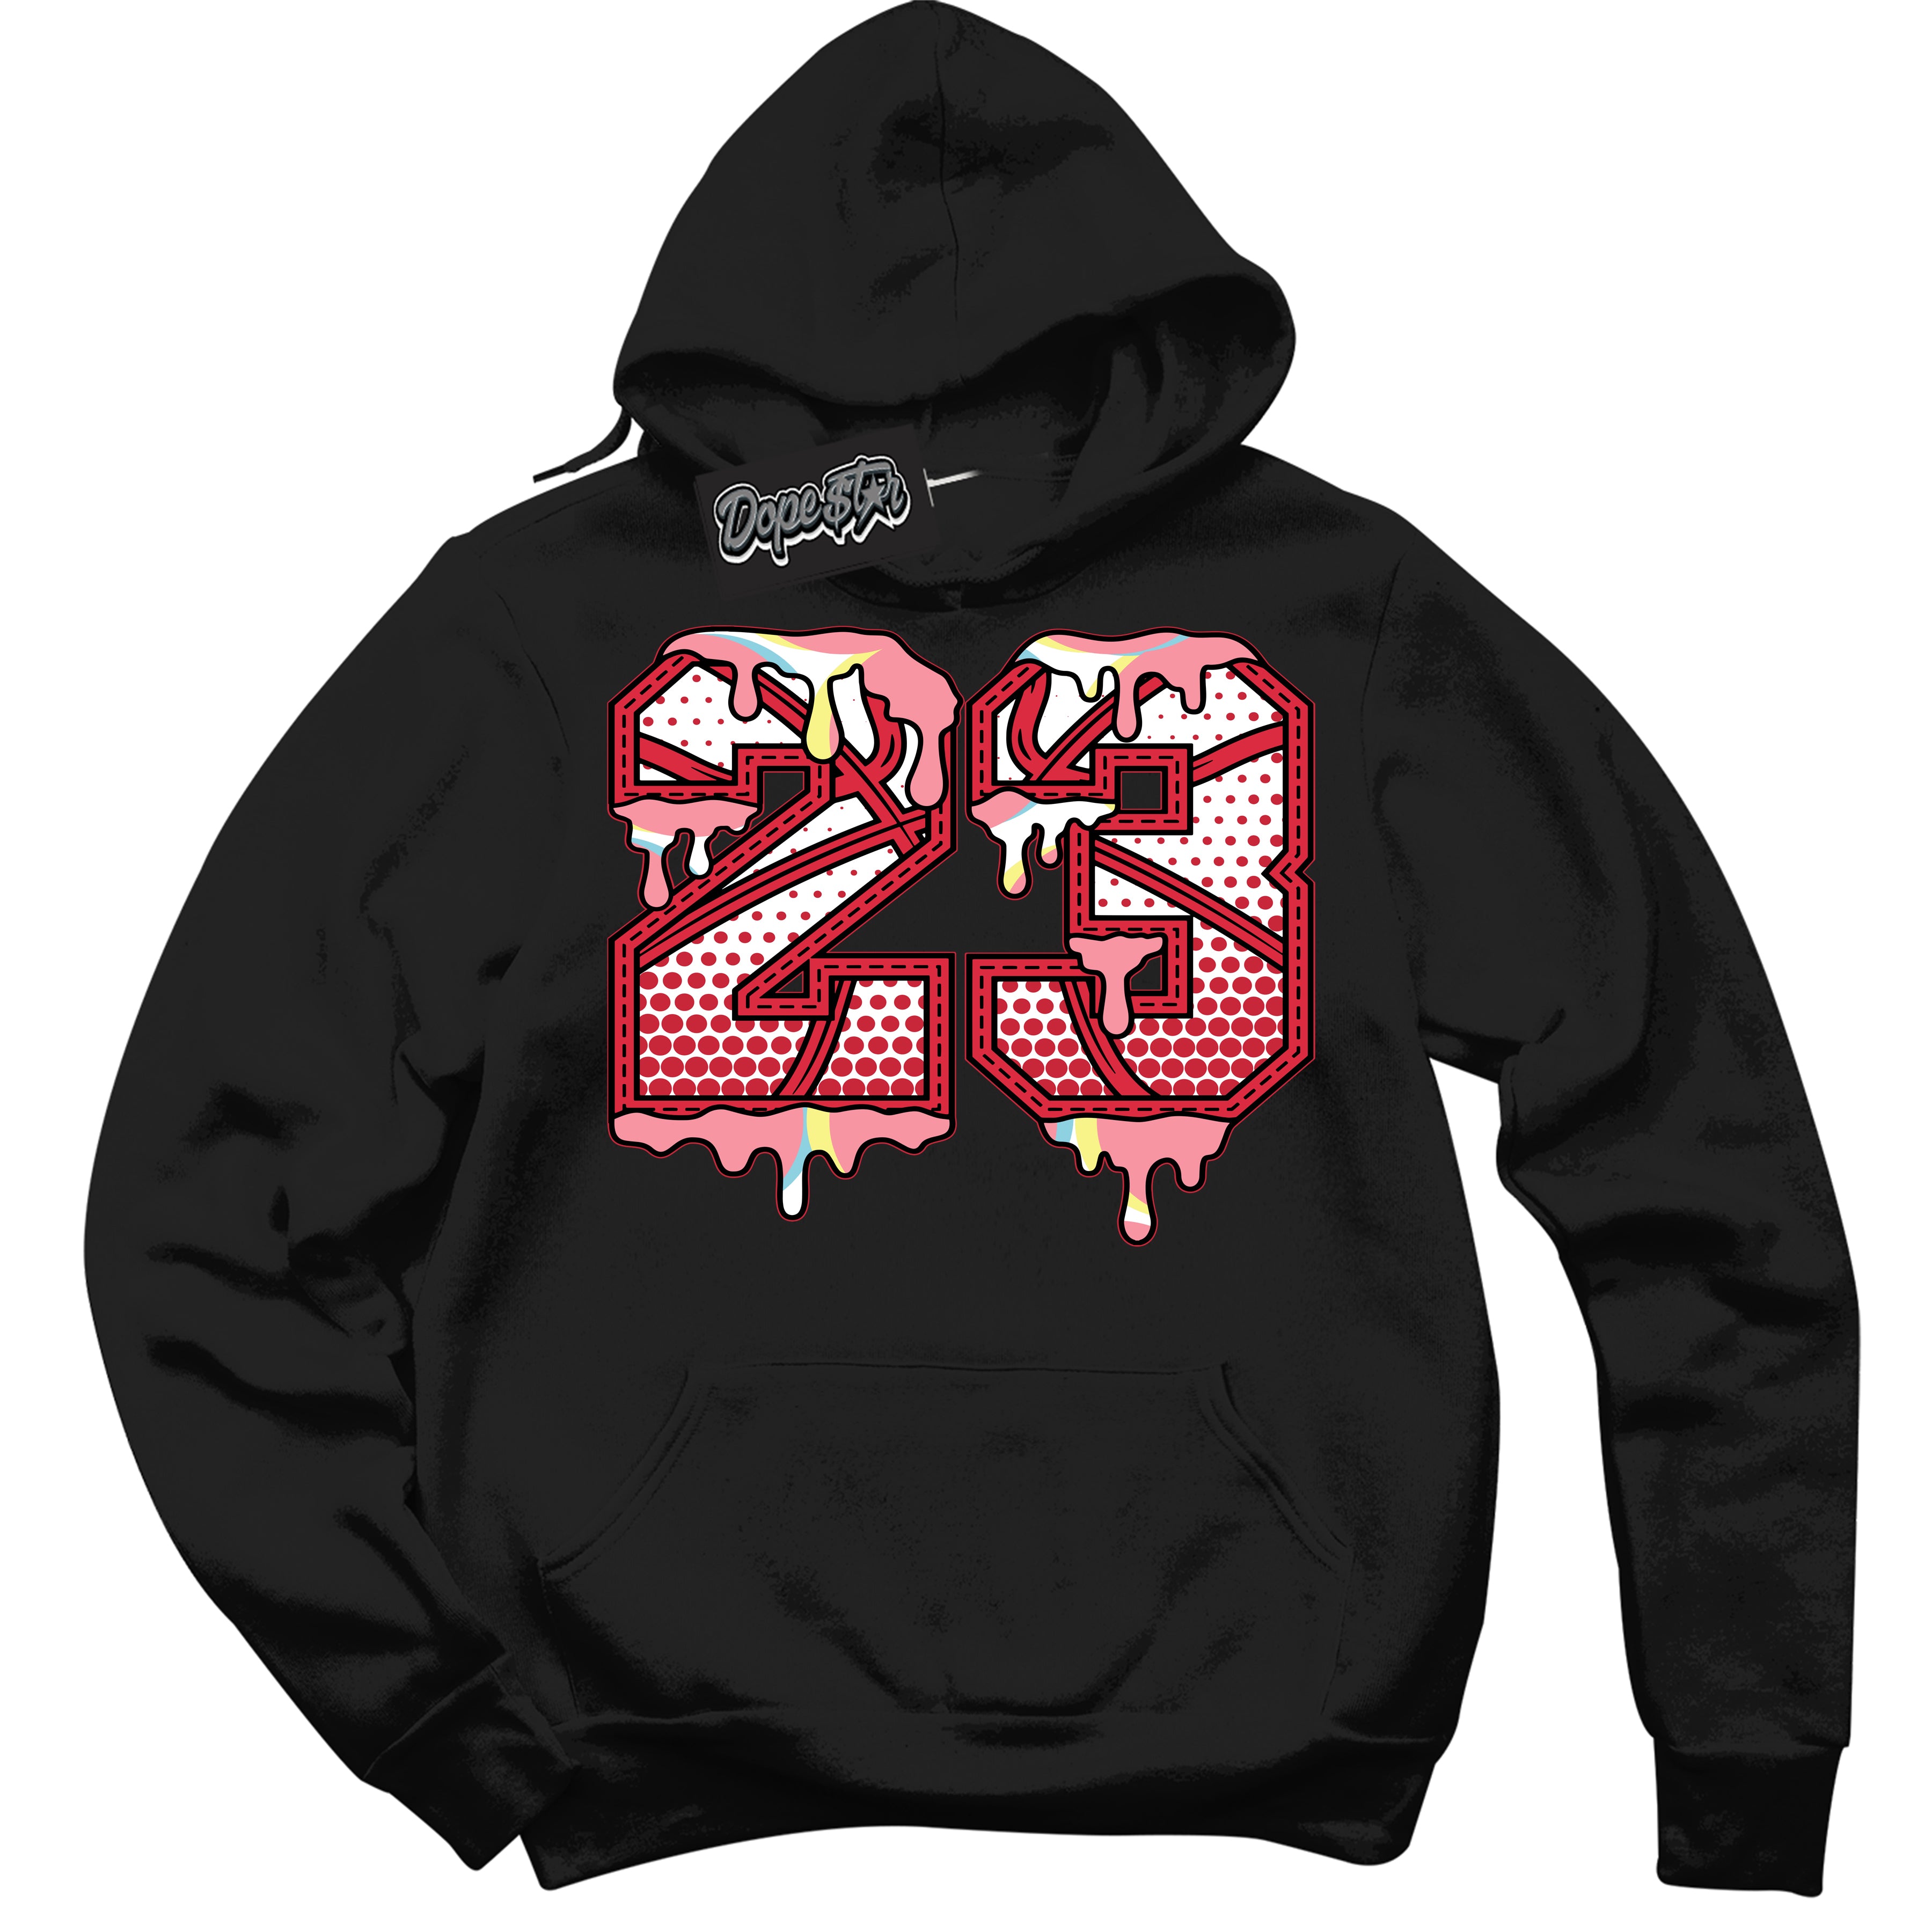 Cool Black Graphic DopeStar Hoodie with “ 23 Ball “ print, that perfectly matches Spider-Verse 1s sneakers